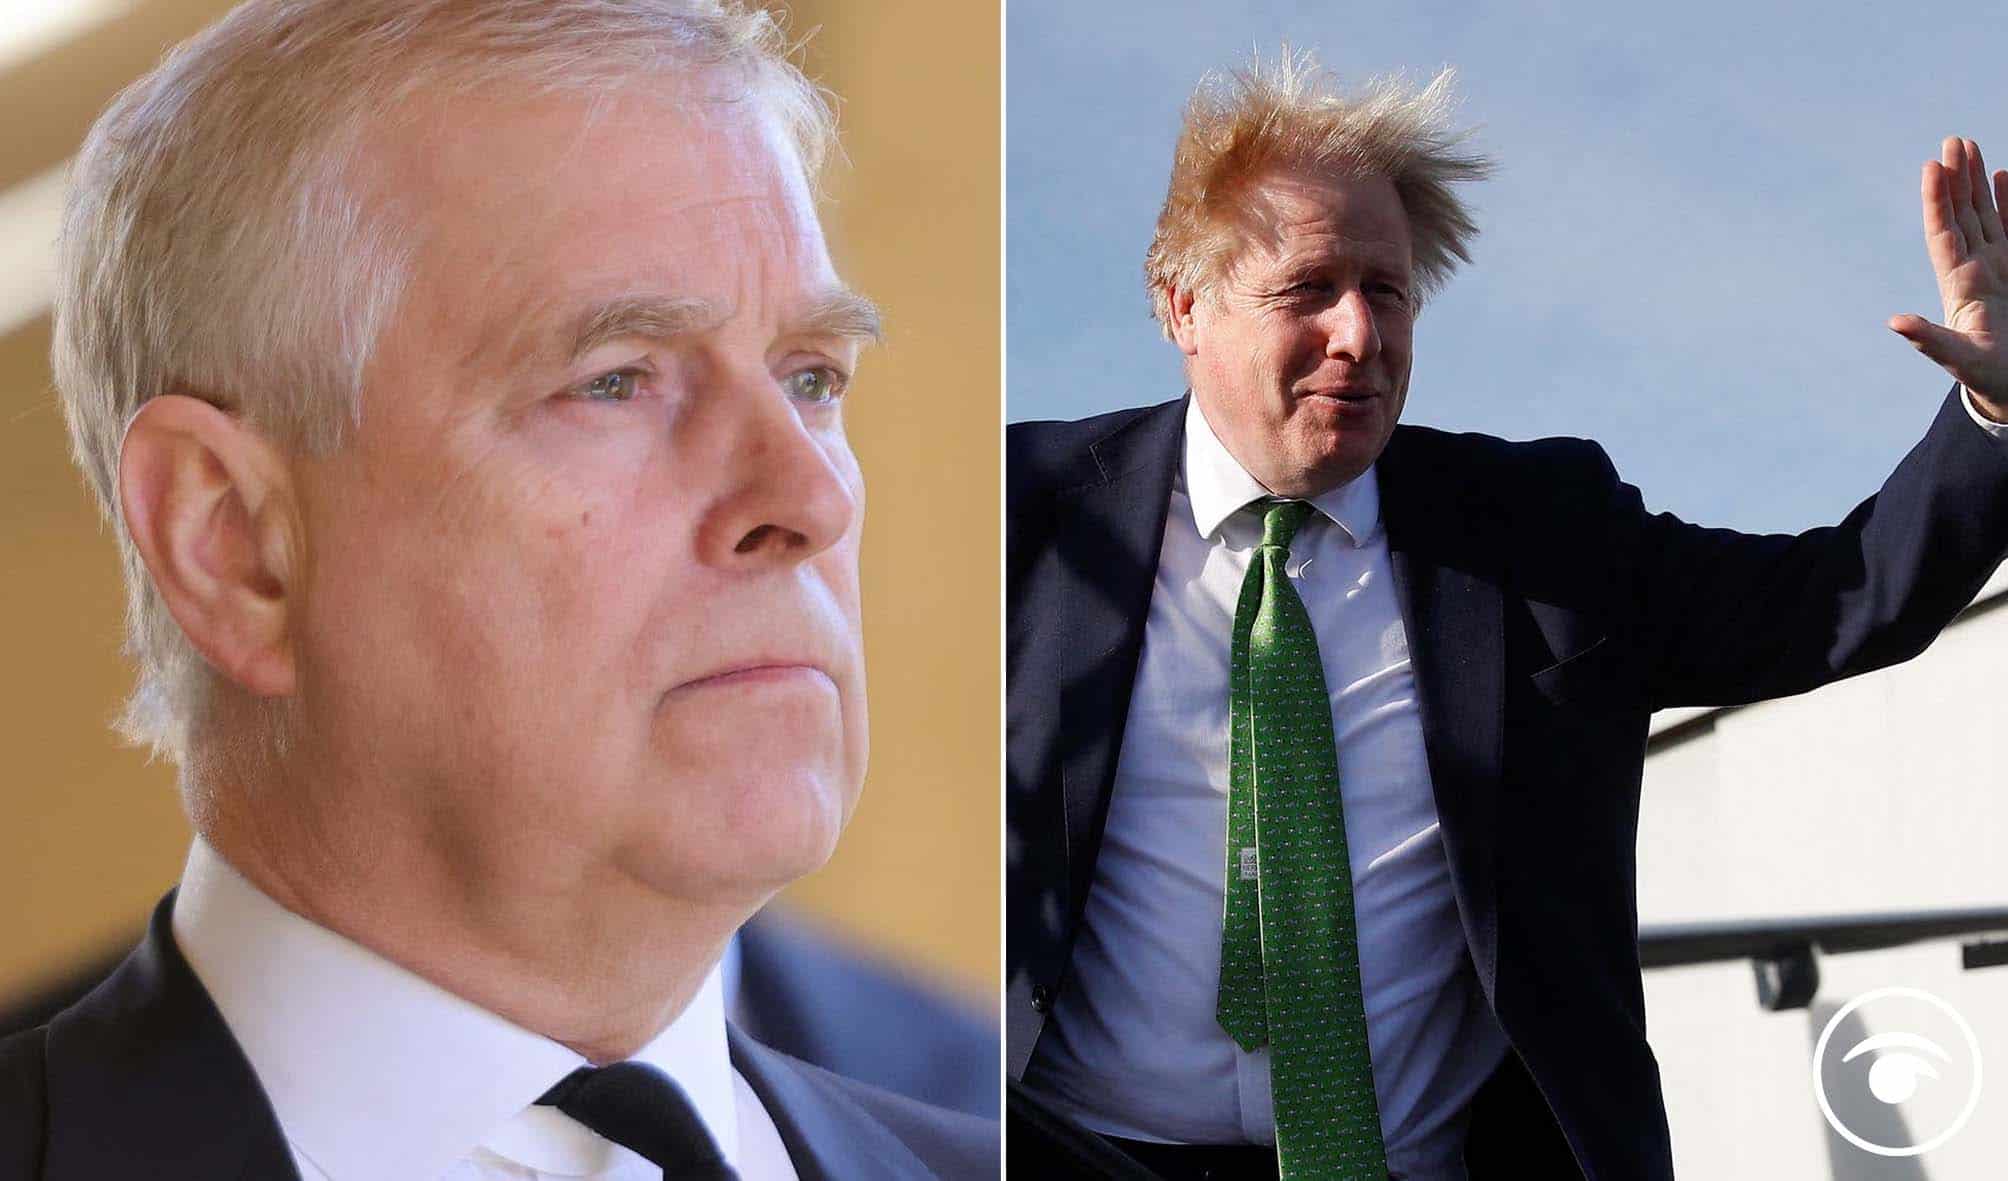 Boris Johnson’s comments about Prince Andrew really haven’t aged well